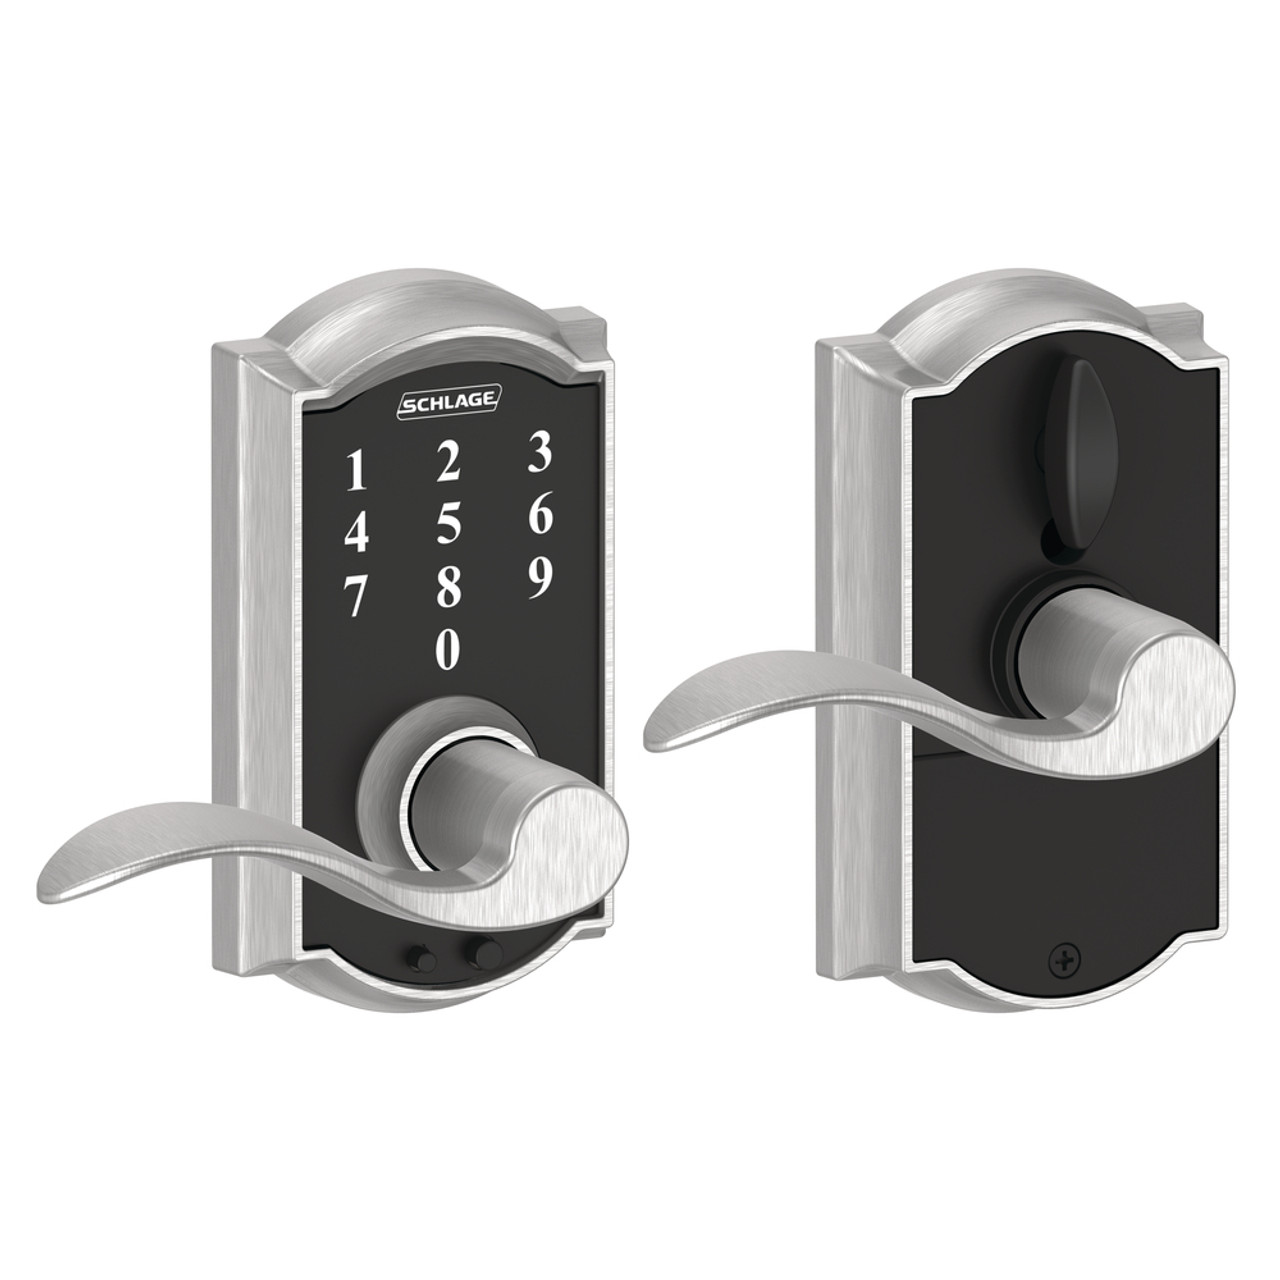 SCHLAGE FE695 Schlage Touch Entry Electronic Lever